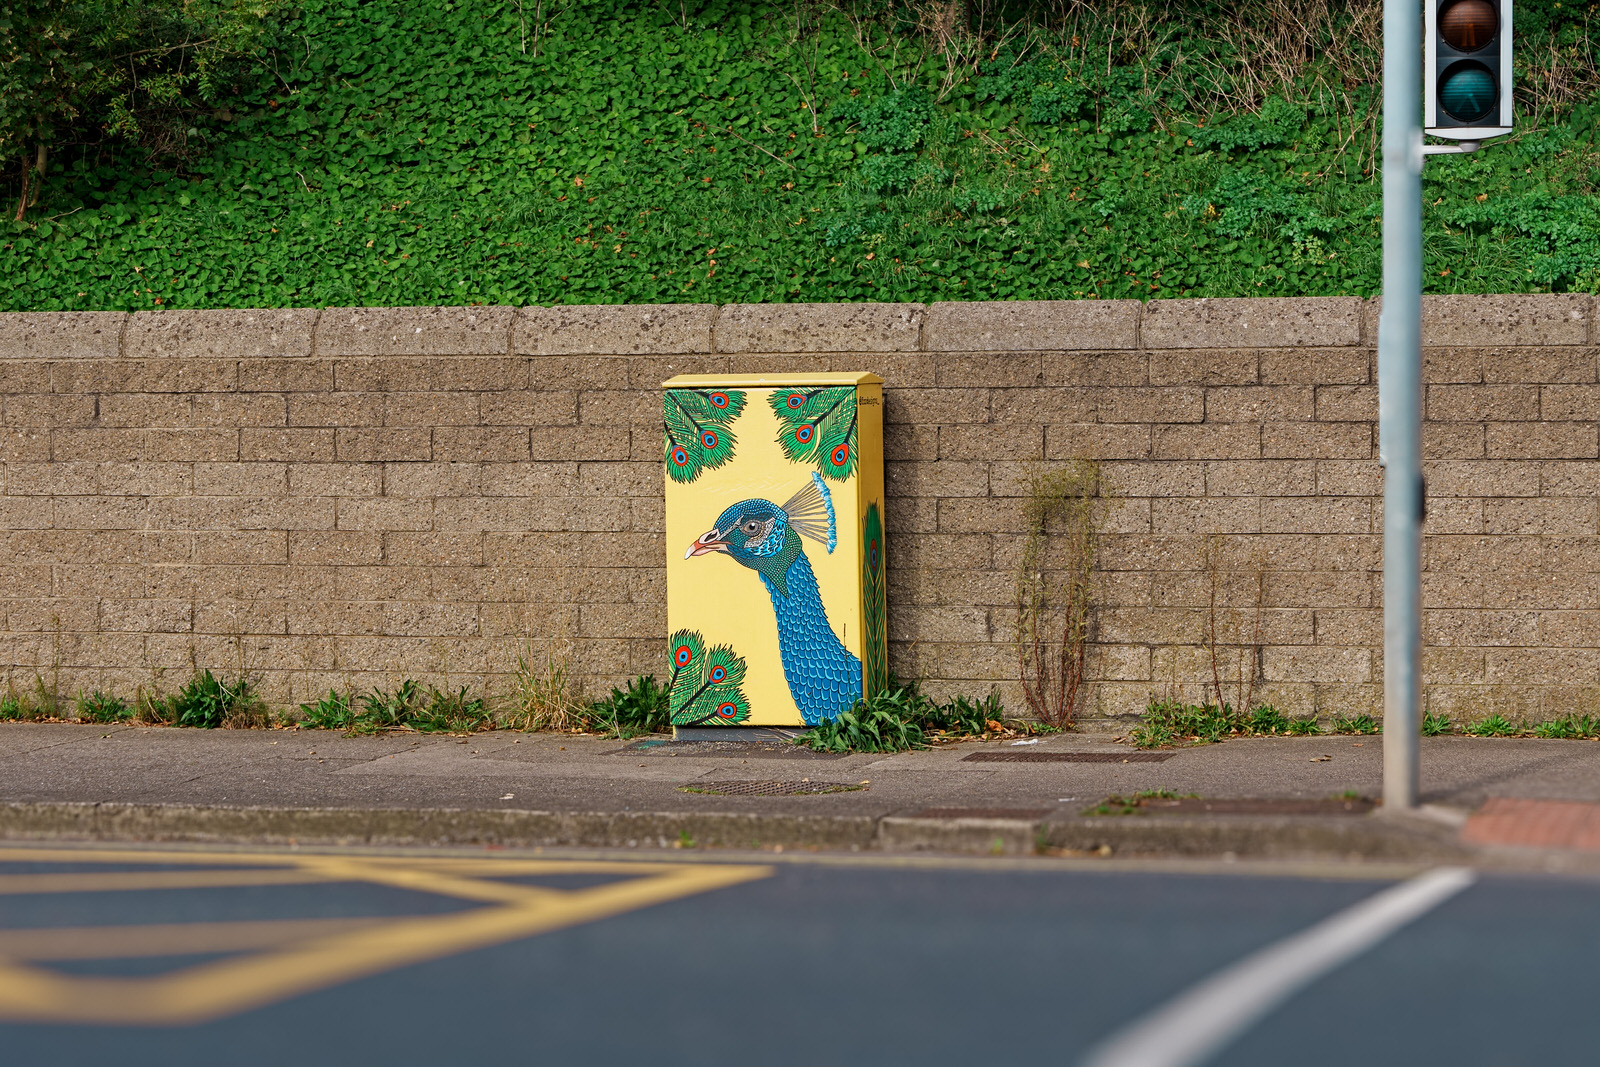 PEACOCK BY CONOR FITZPATRICK @FIZZDESIGNS [PAINT-A-BOX STREET ART IN MILLTOWN] 001